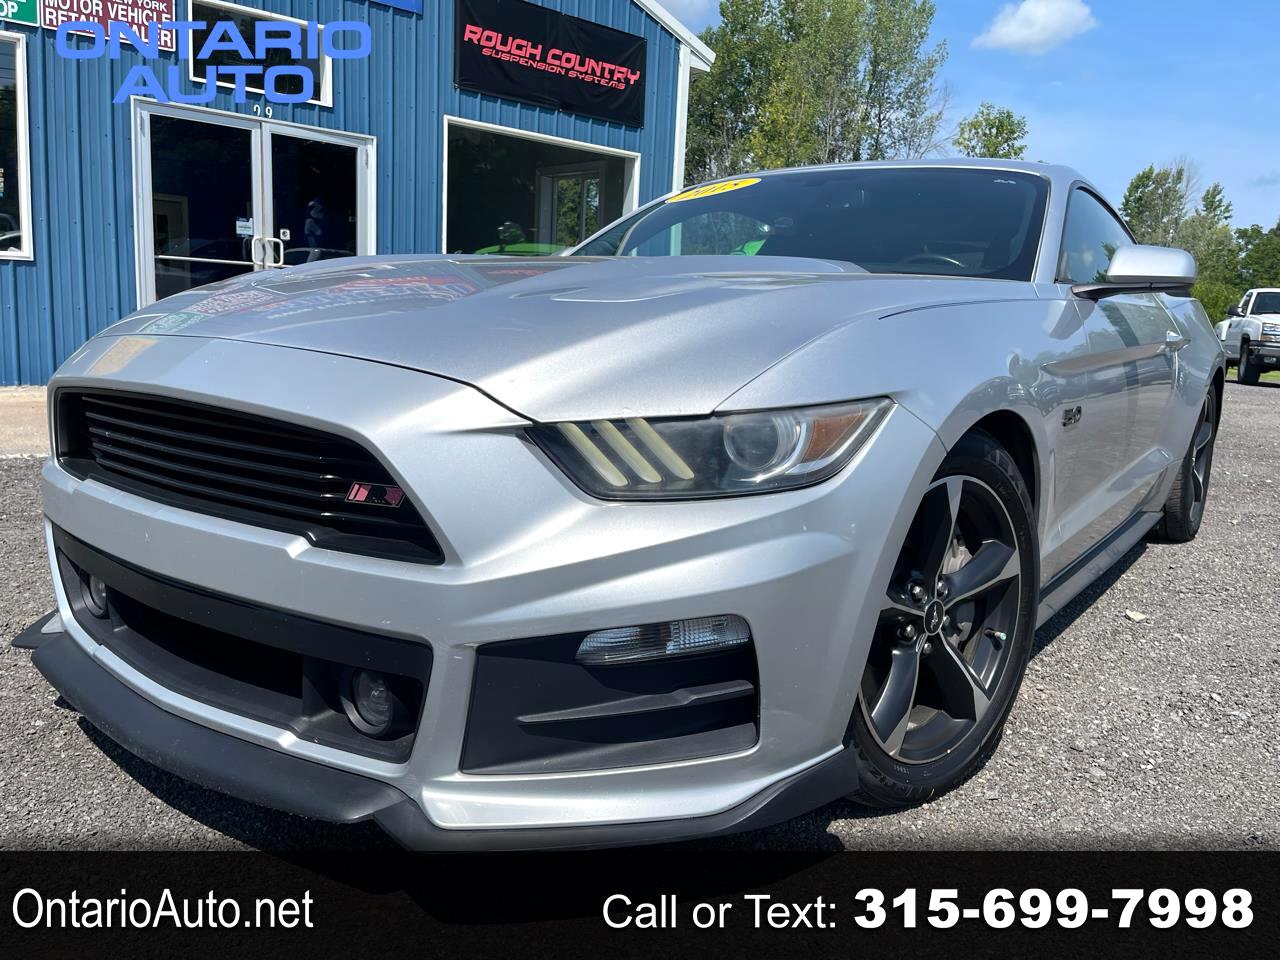 Ford Mustang 2dr Fastback GT 2015